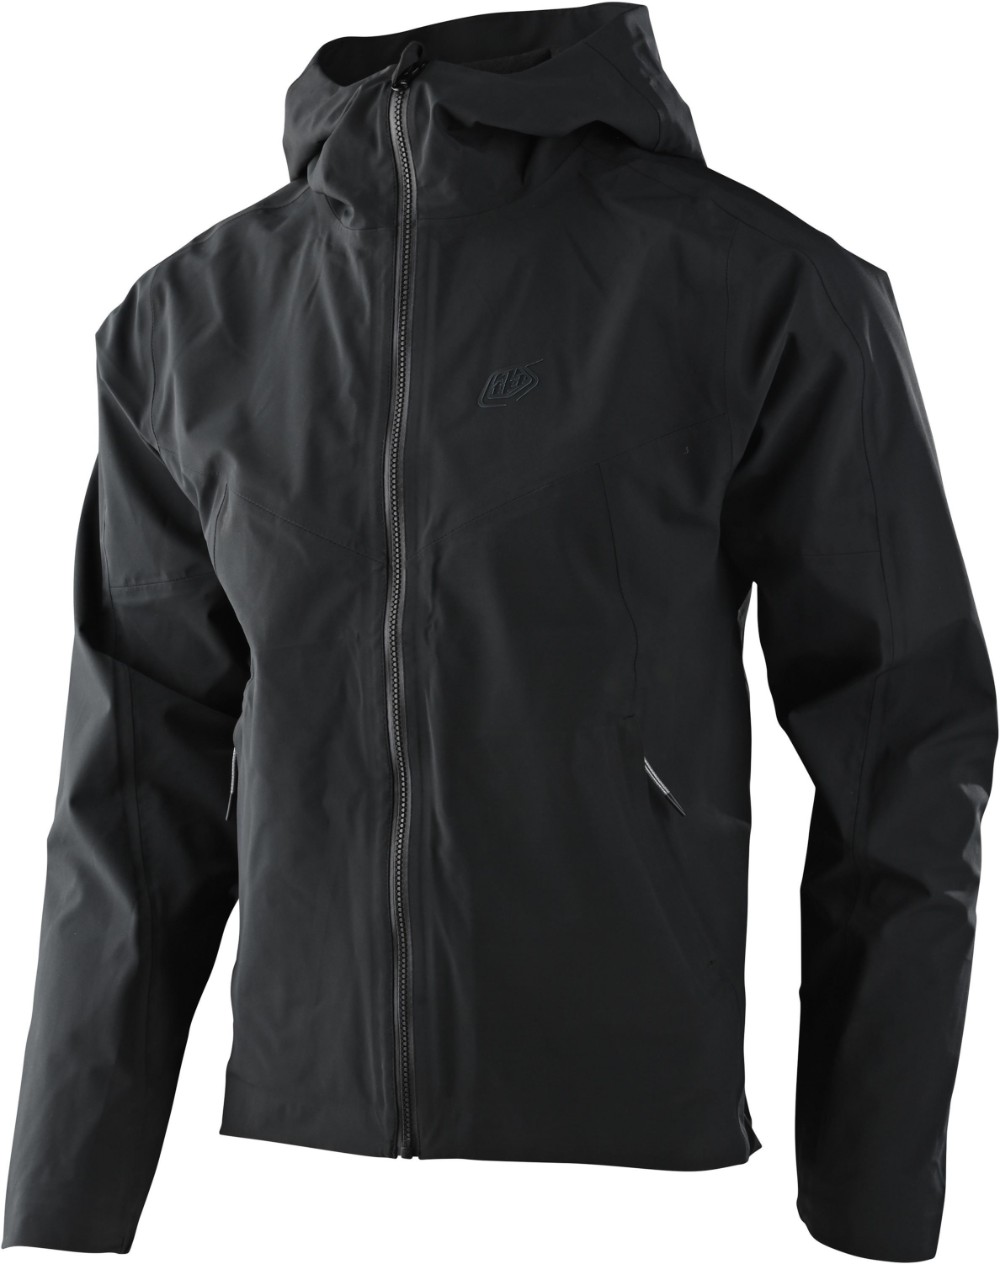 Descent Waterproof Cycling Jacket image 0